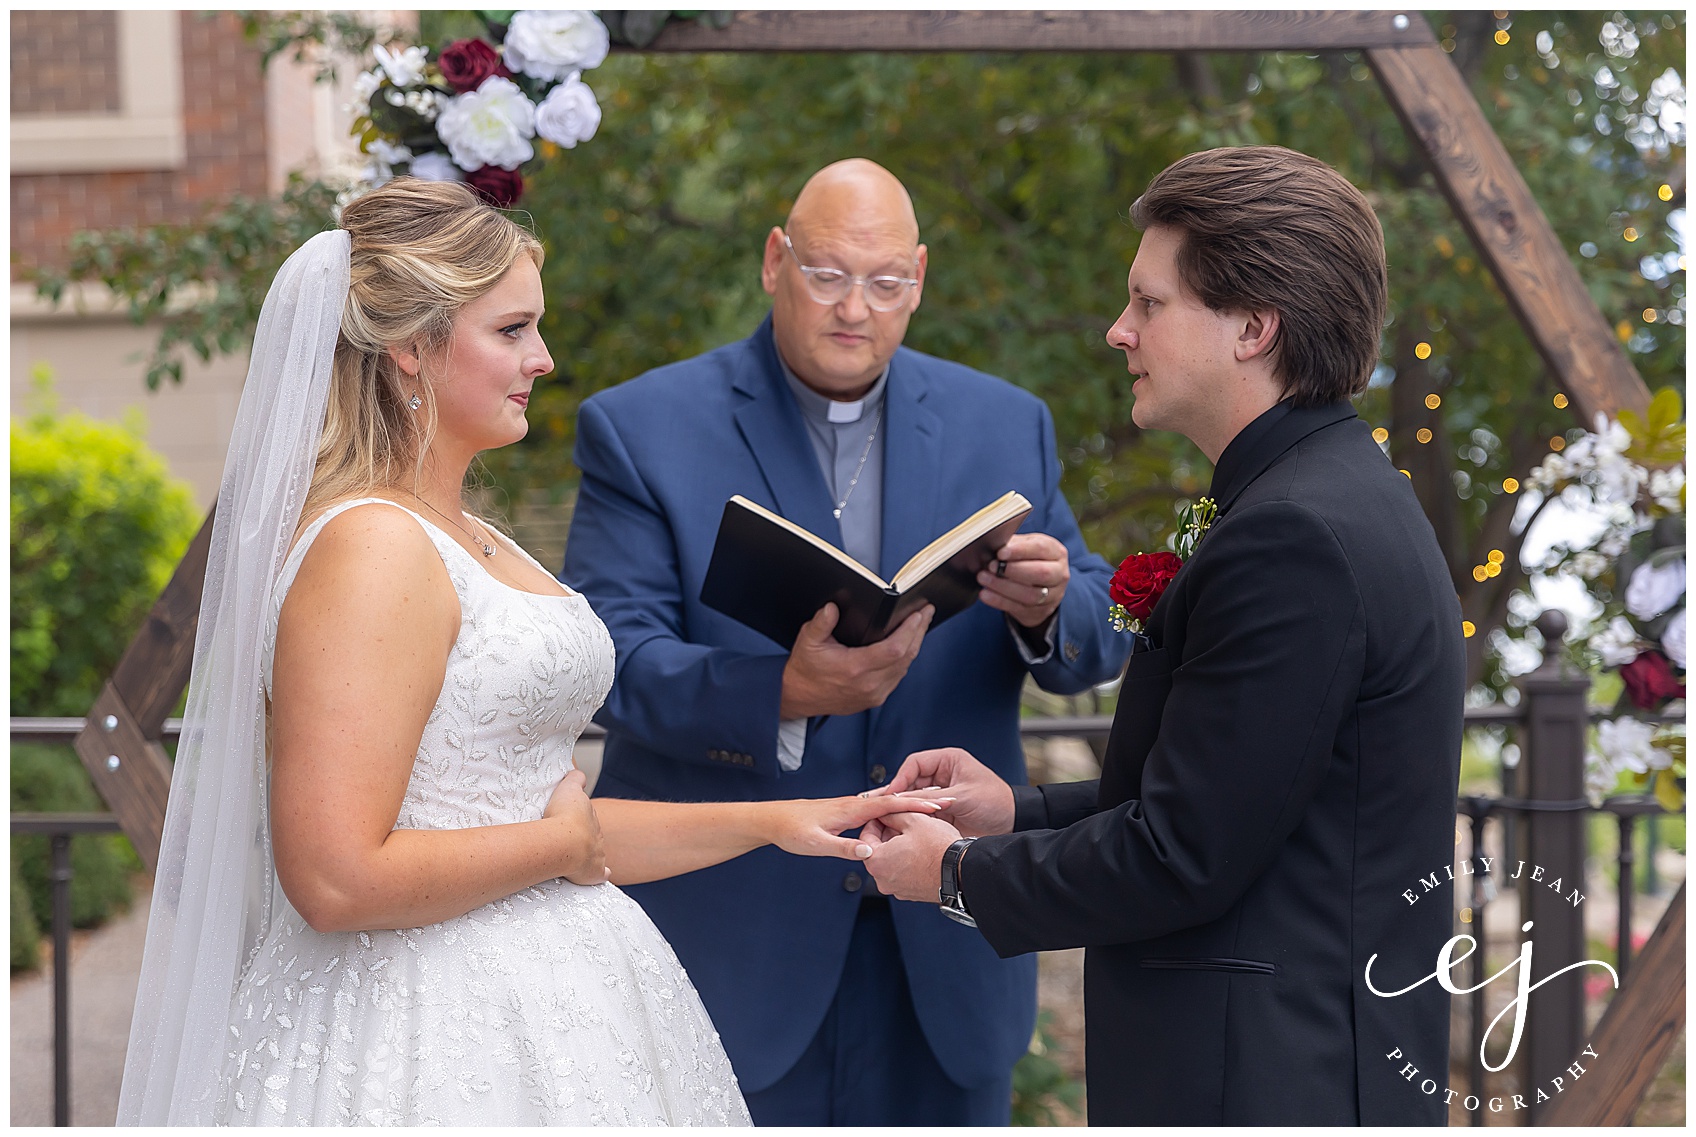 exchanging rings during wedding ceremony